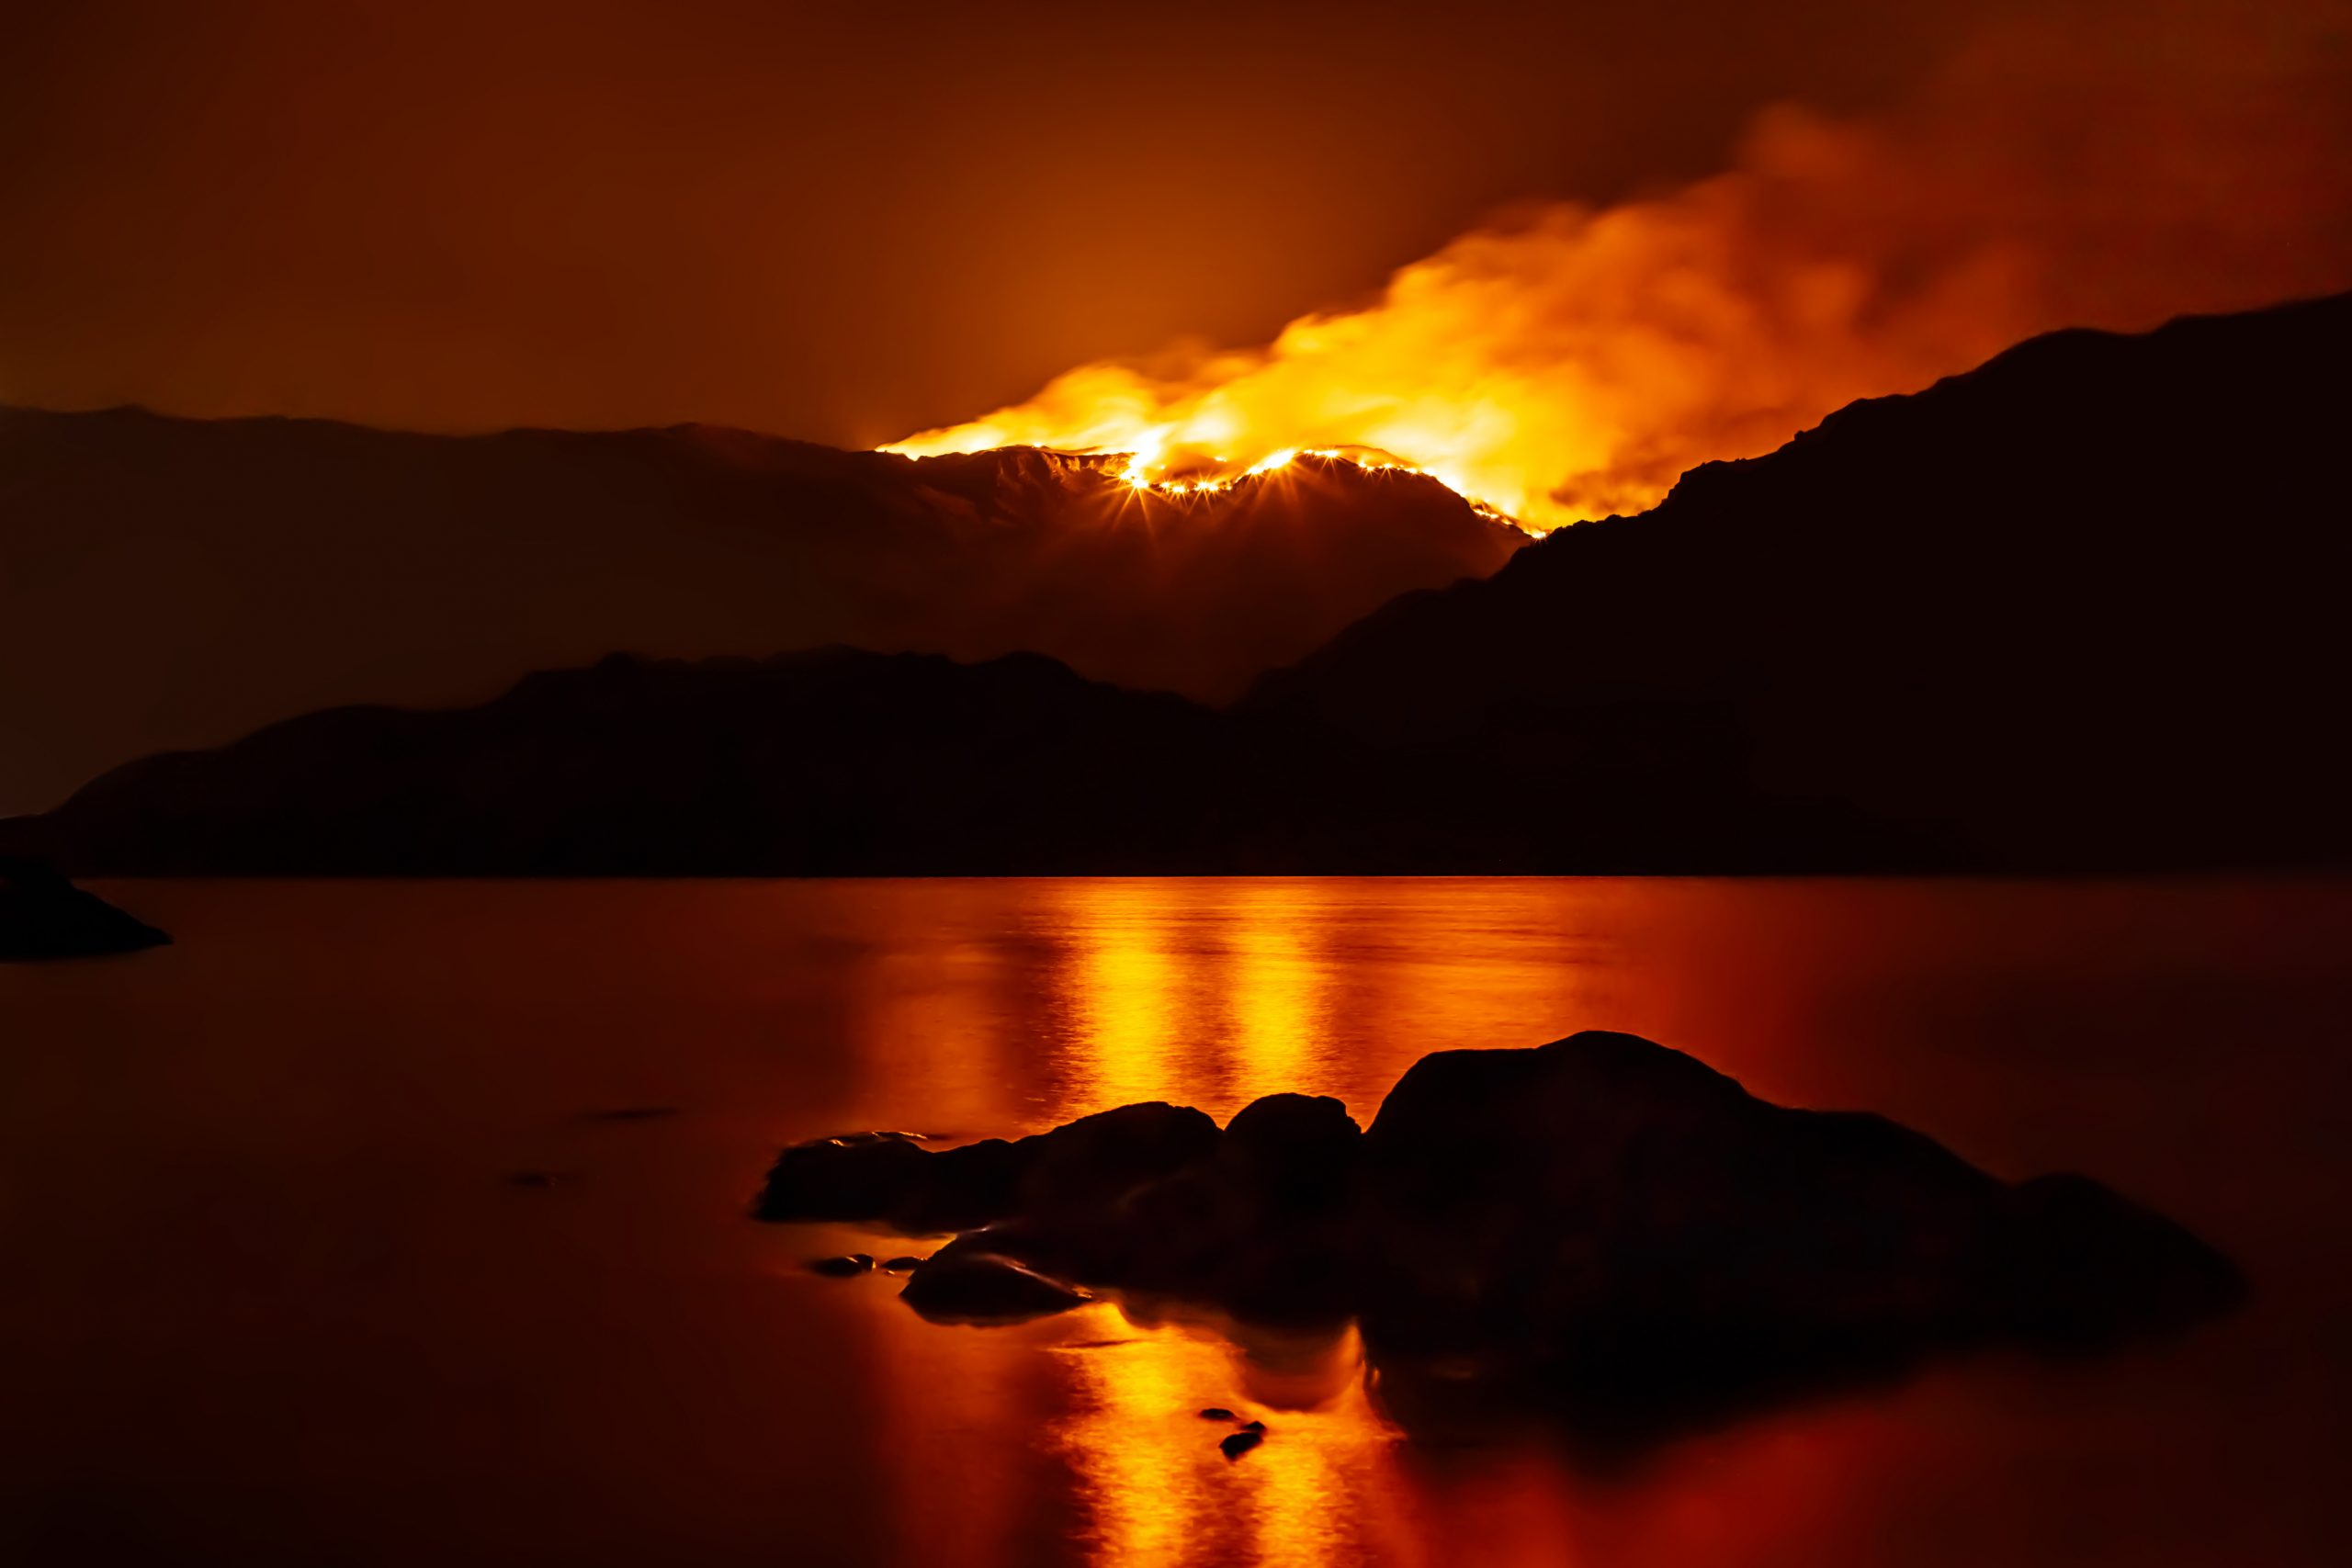 Forest fire at night reflecting in nearby lake. Drax